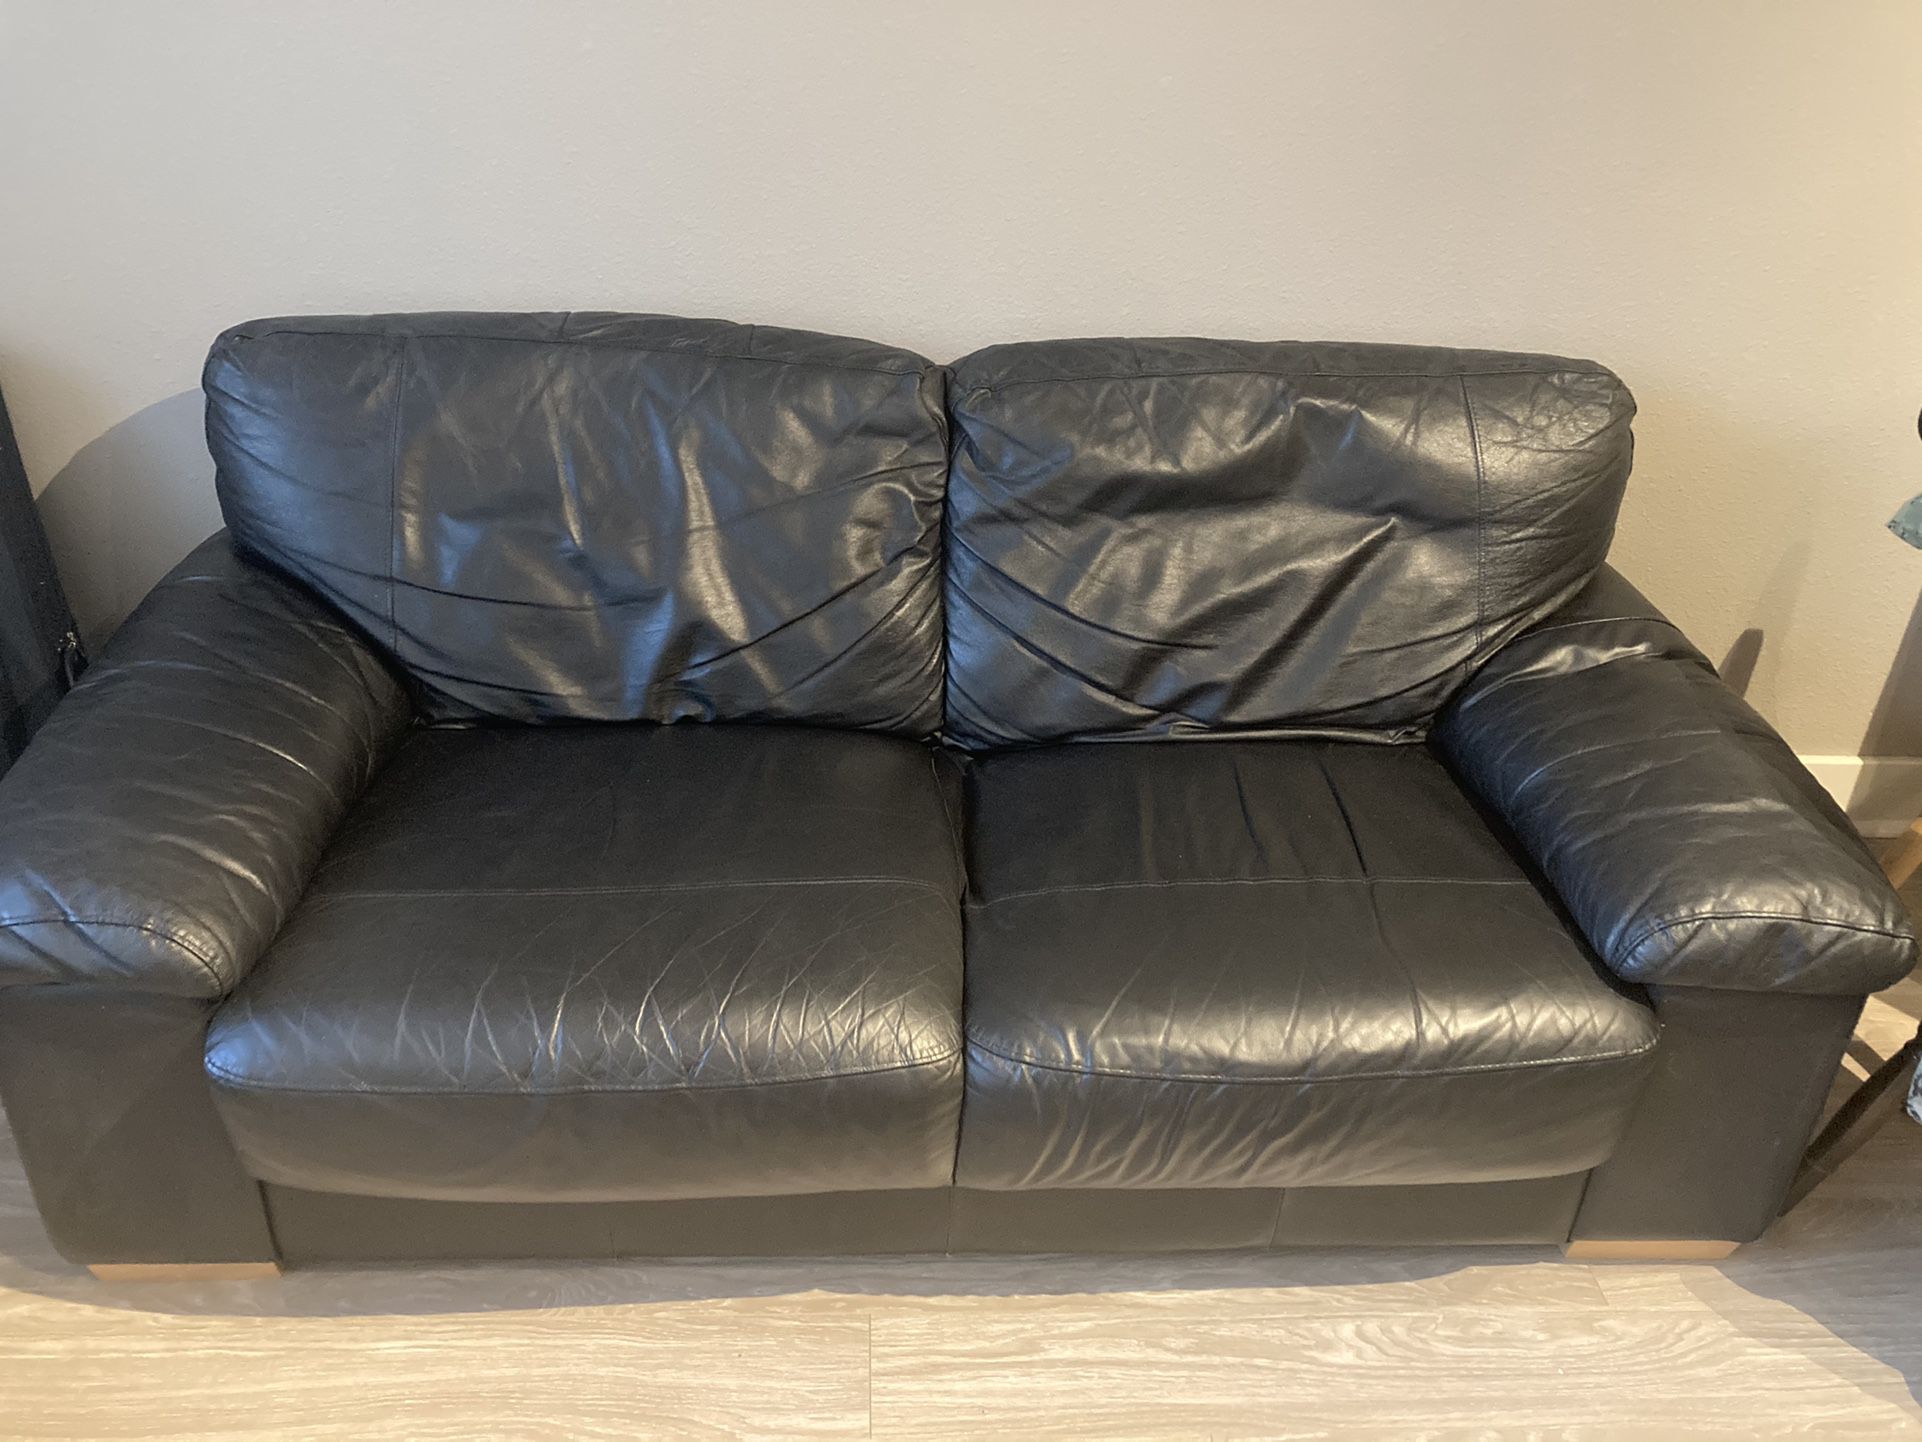 FREE OBO: Couch 2 Seater Couch